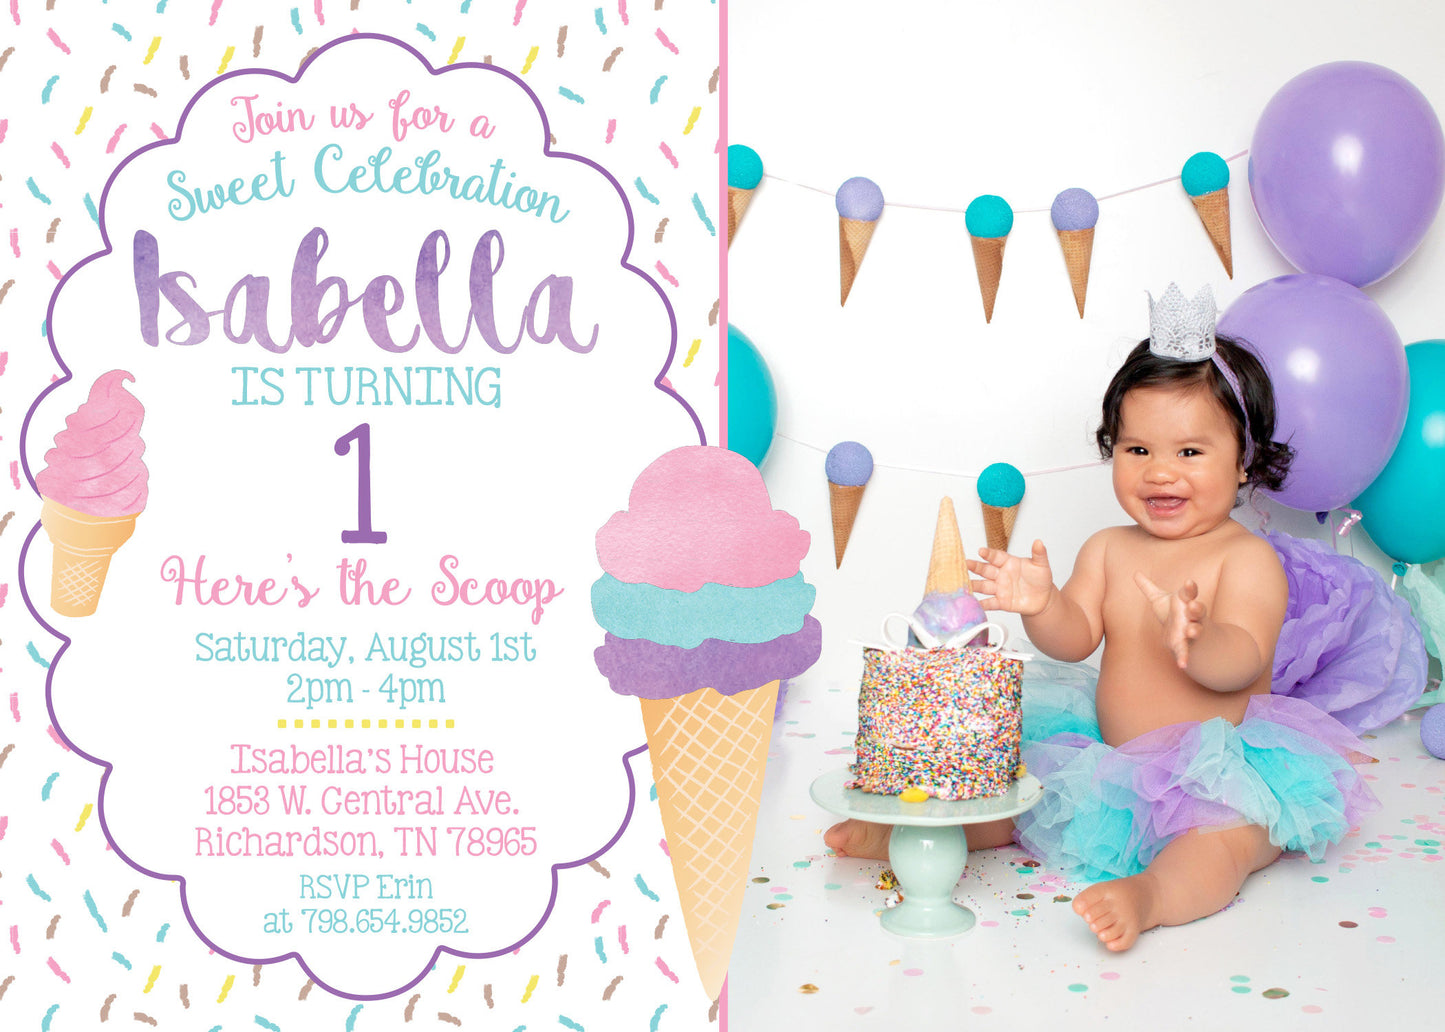 ICE CREAM SOCIAL Birthday Party Invitation with Photo! Two Options! Printed or Digital!